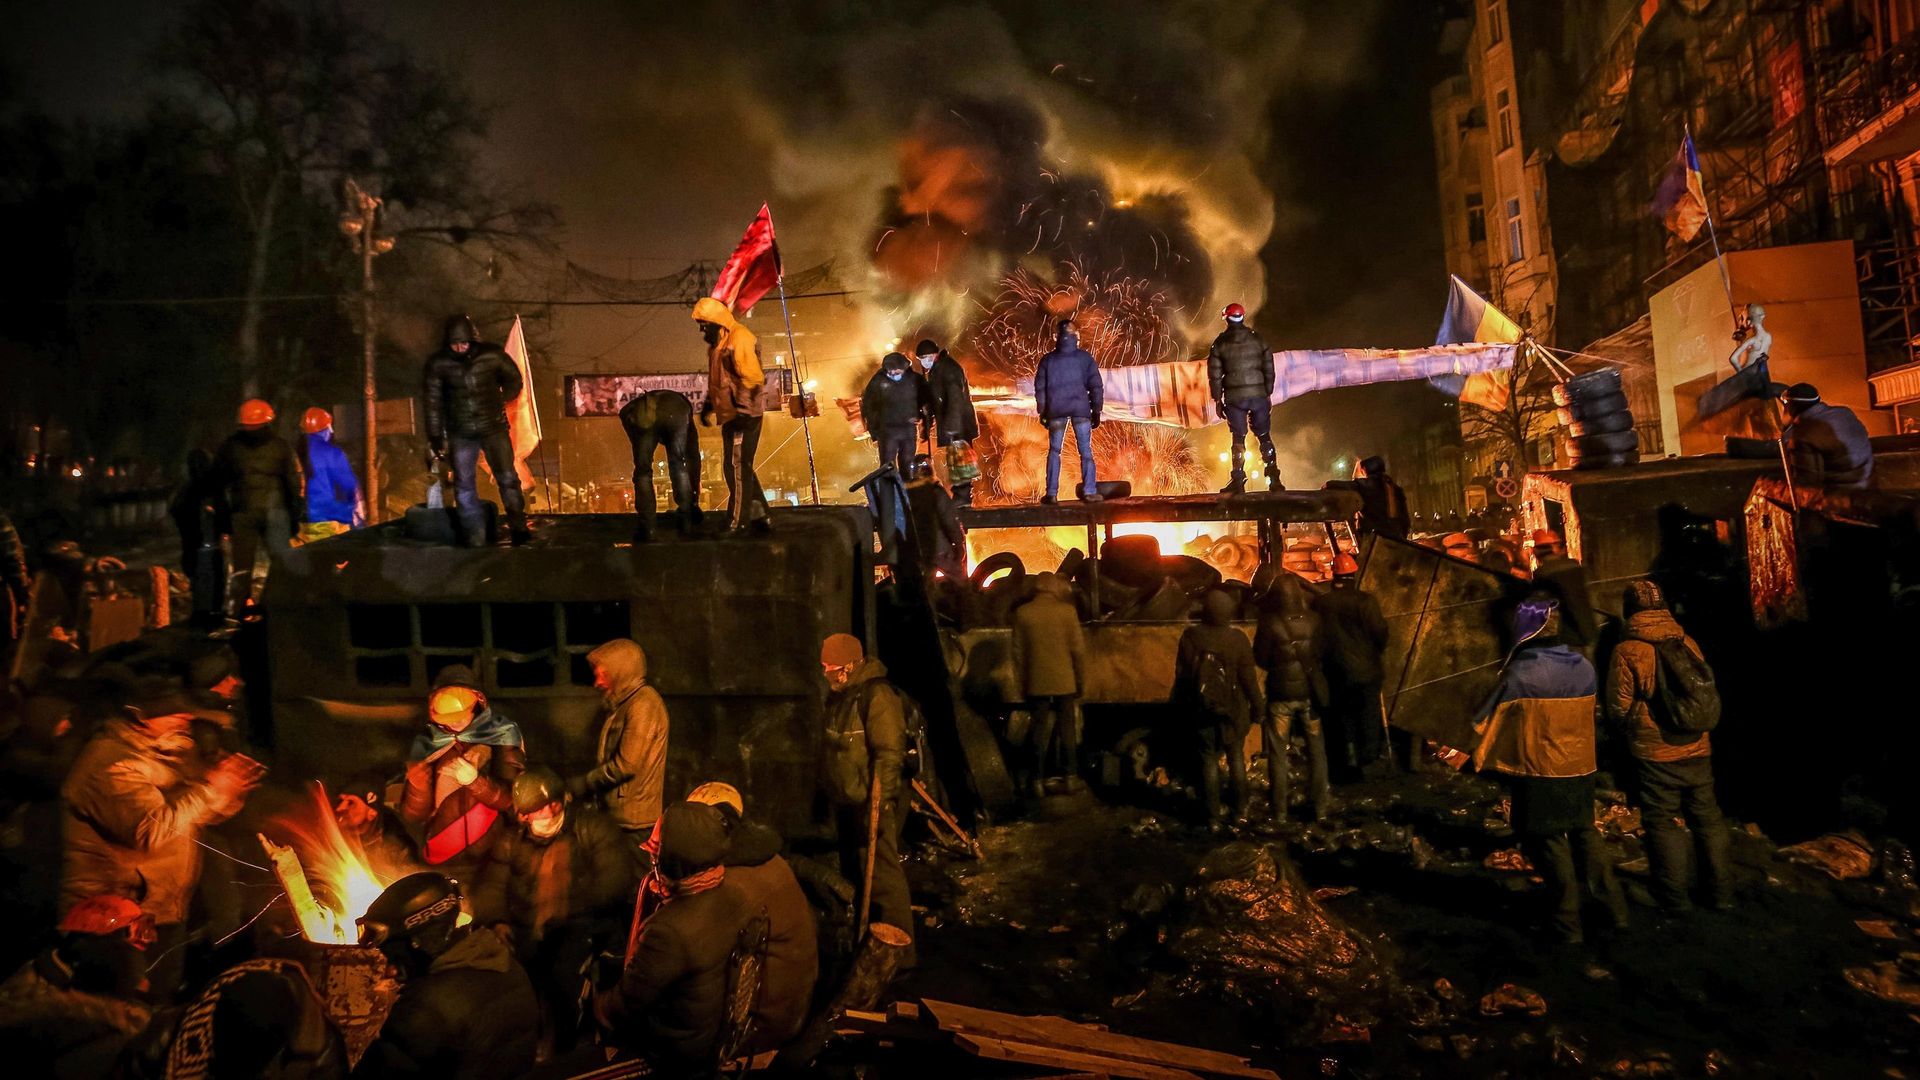 Winter on Fire: Ukraine's Fight for Freedom background